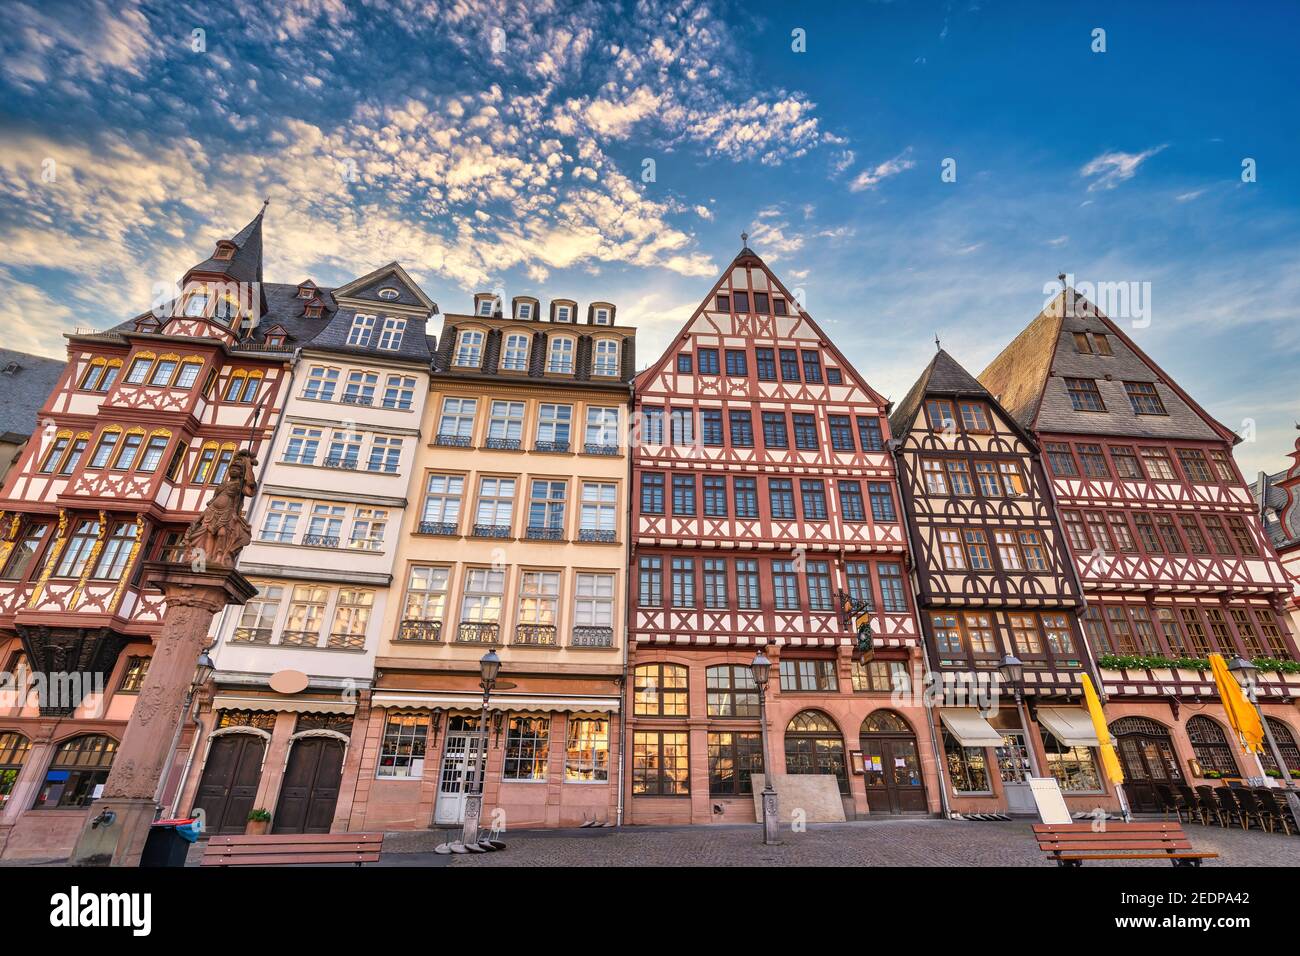 Frankfurt Germany, city skyline at Romer Town Square with half-timbered house Stock Photo